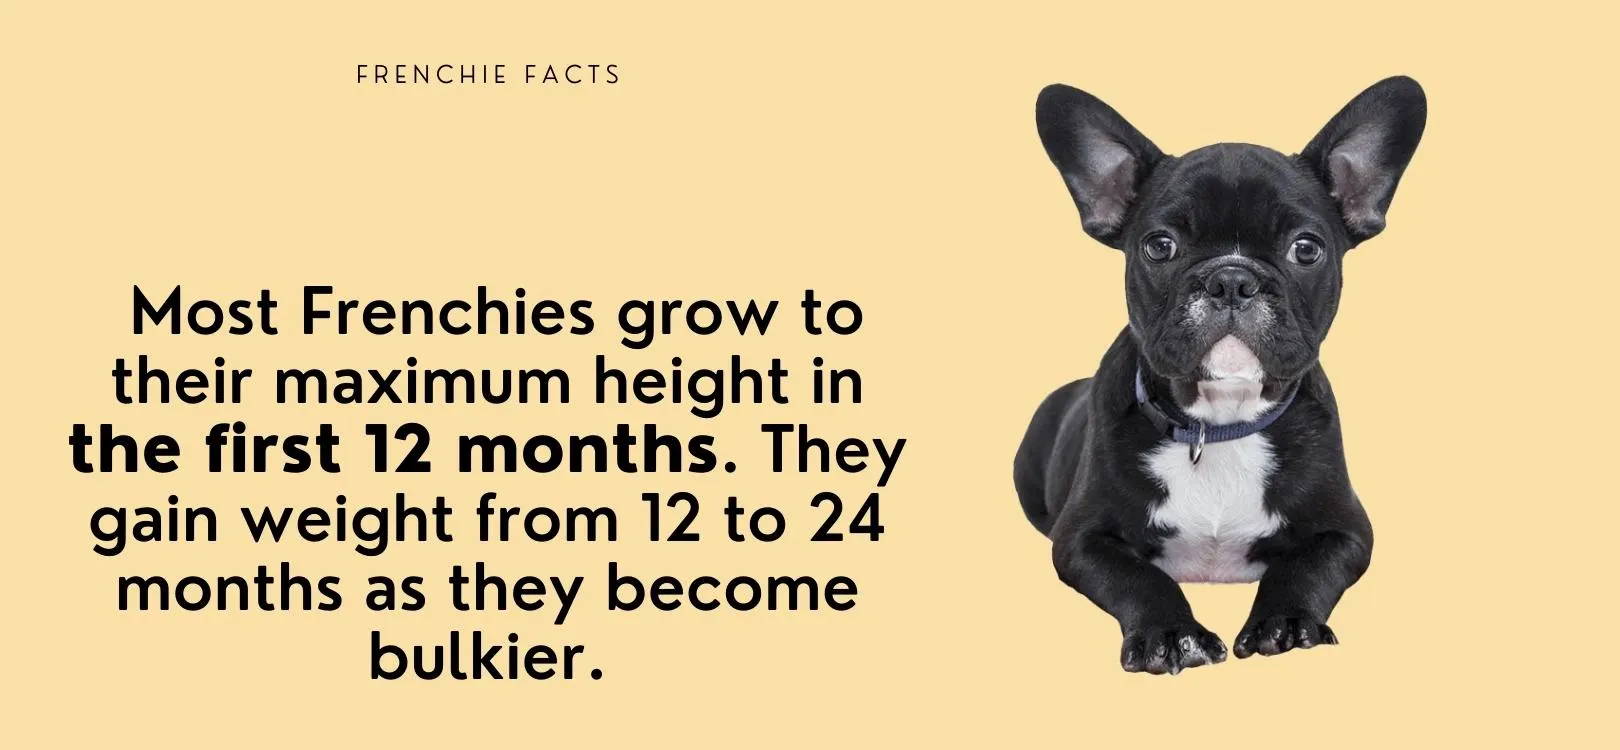 facts on french bulldogs 